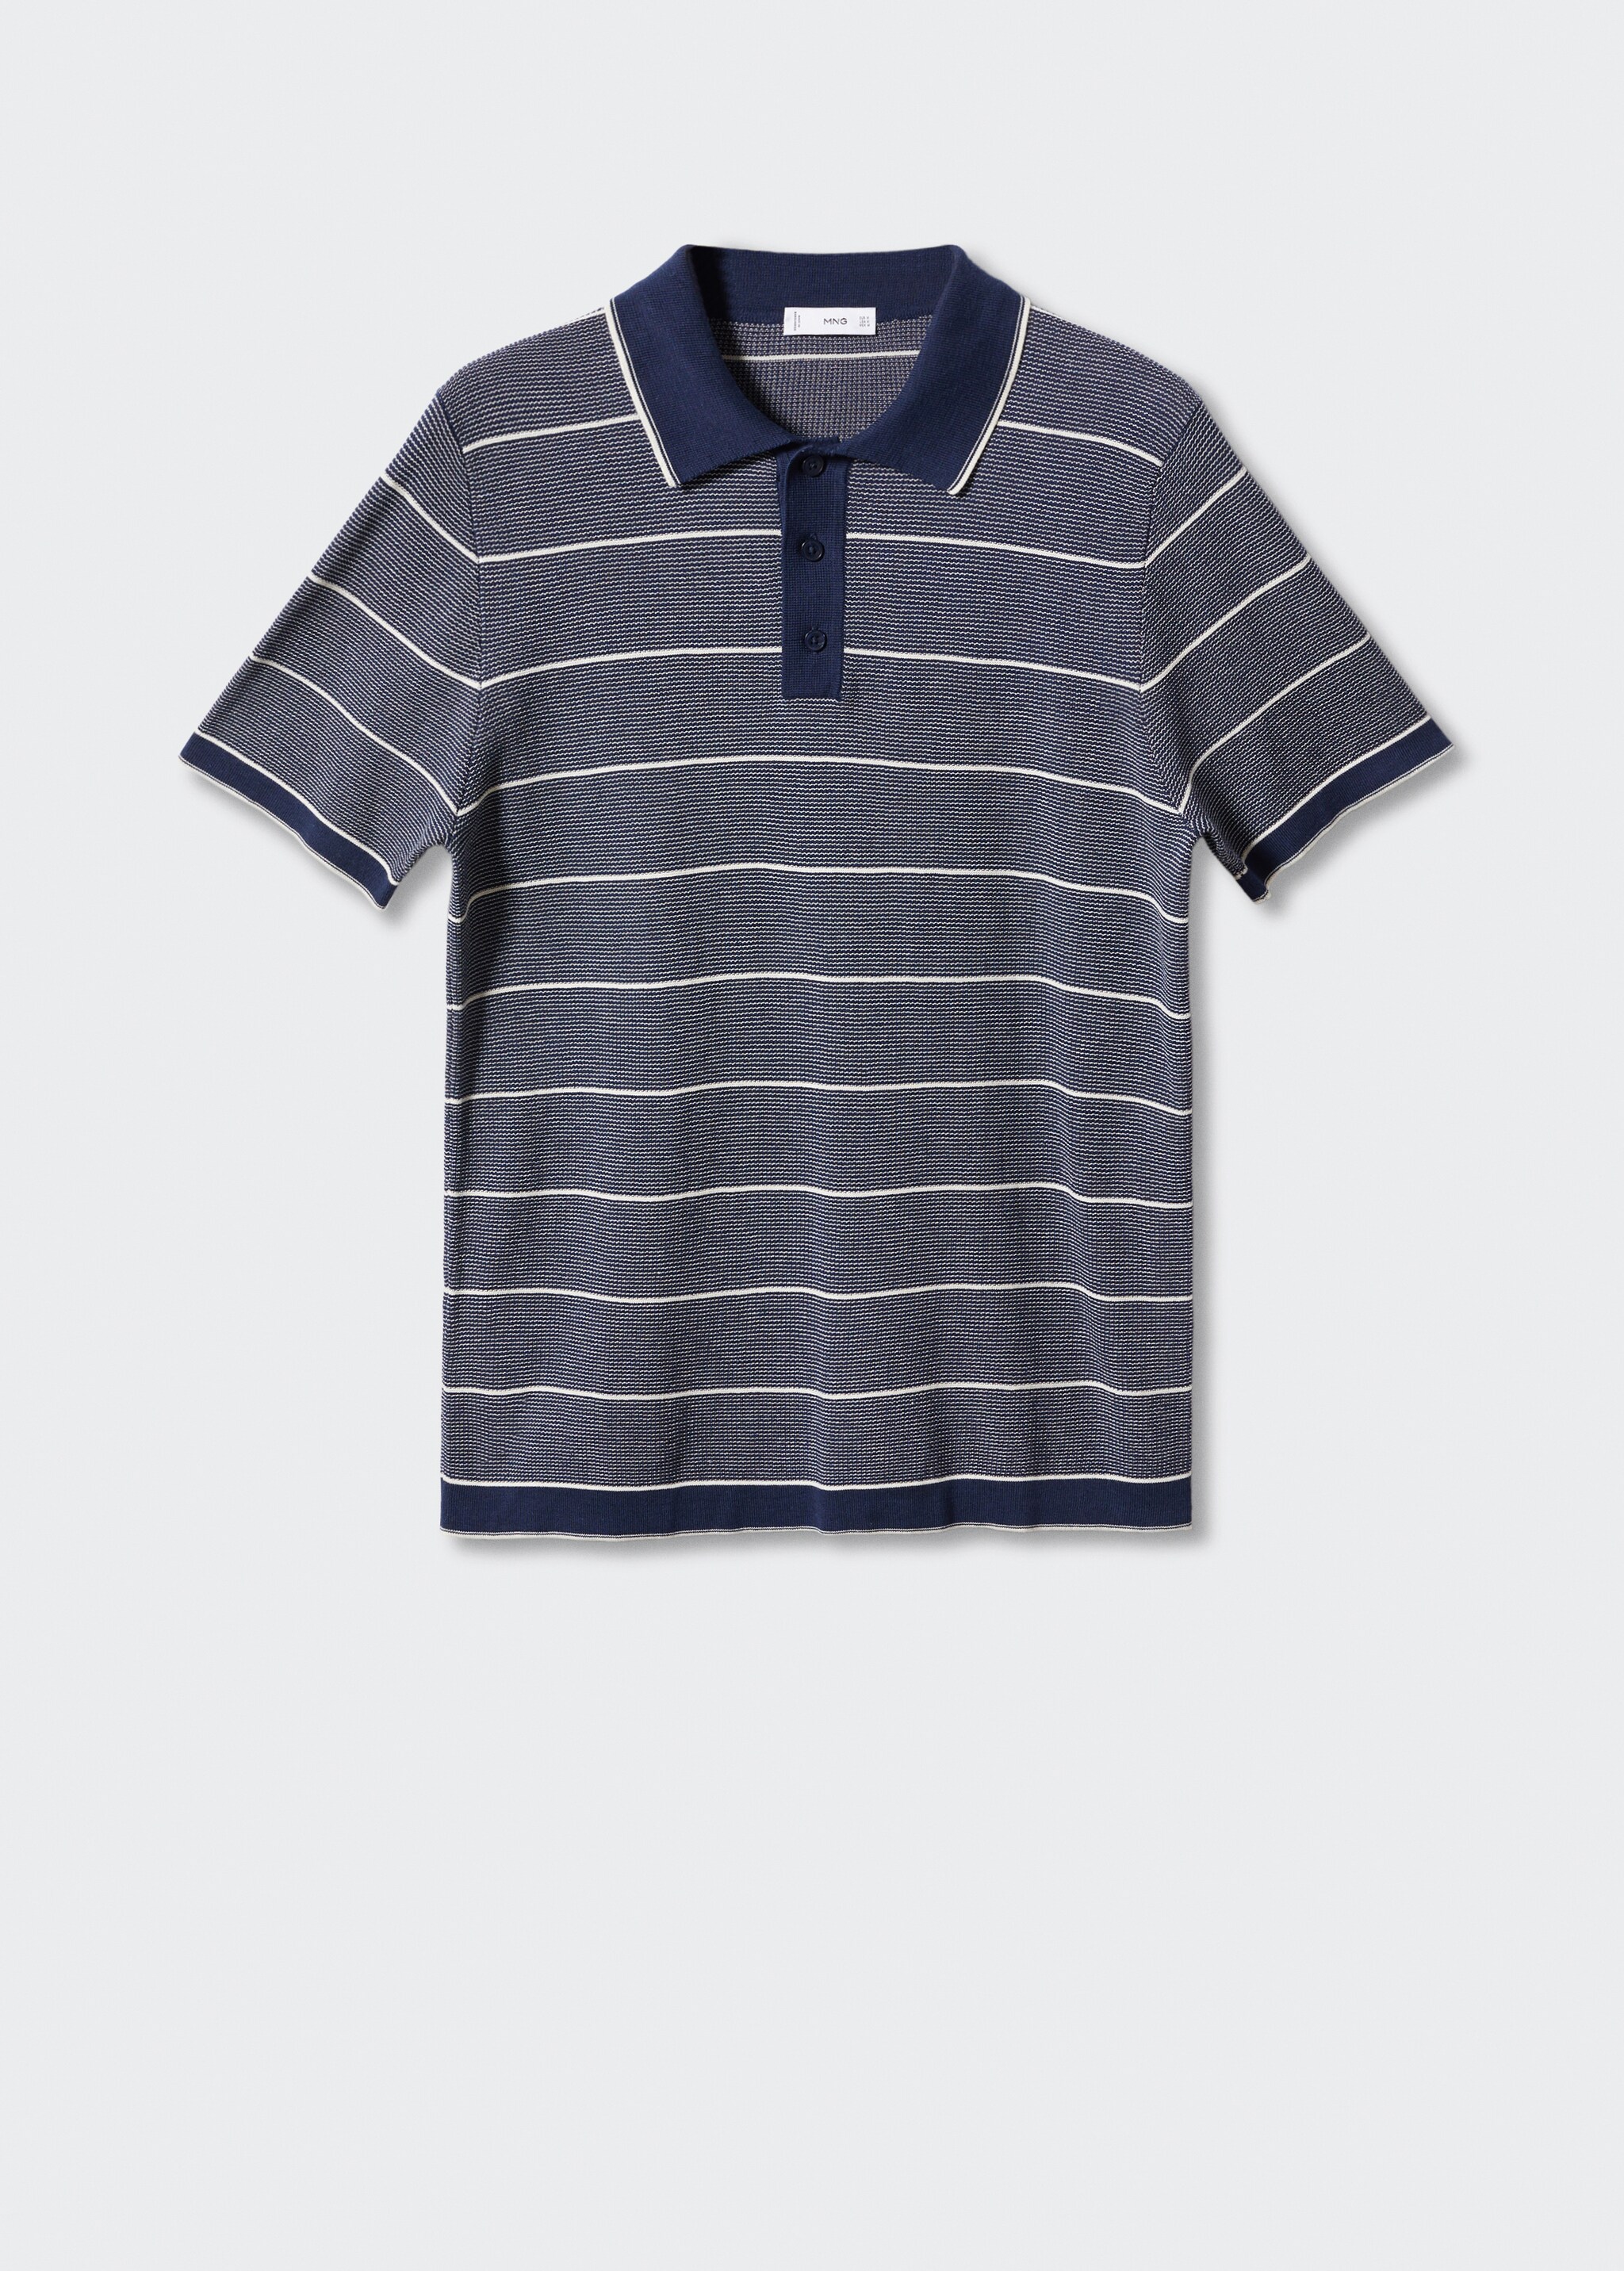 Striped knit cotton polo shirt - Article without model